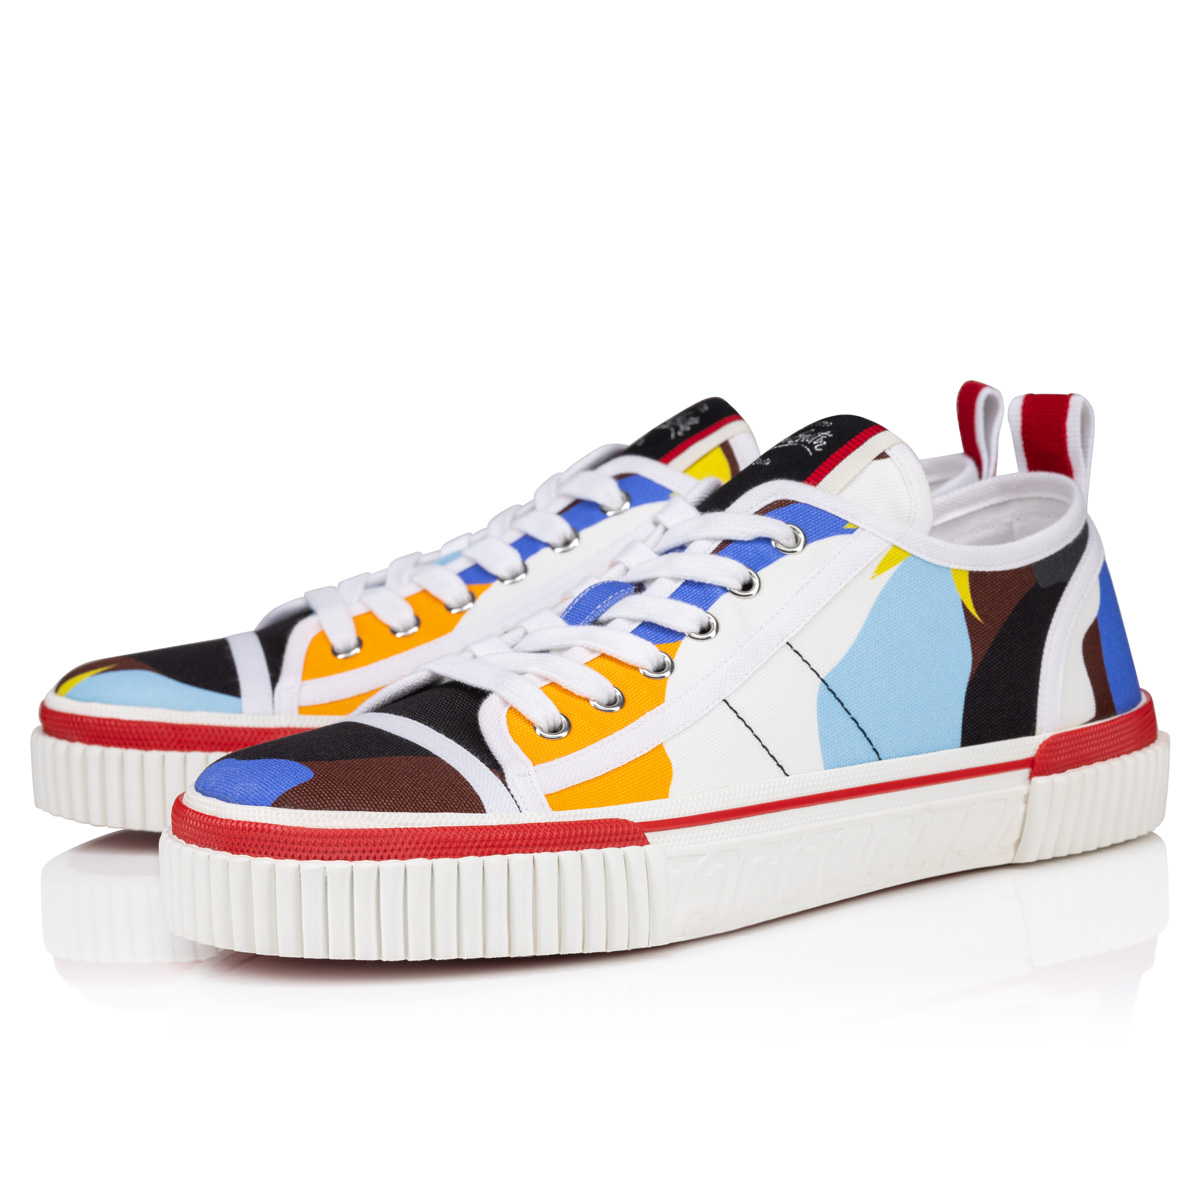 Christian Louboutin Multicolor Printed Leather High Top Sneakers Size 42.5 Christian  Louboutin